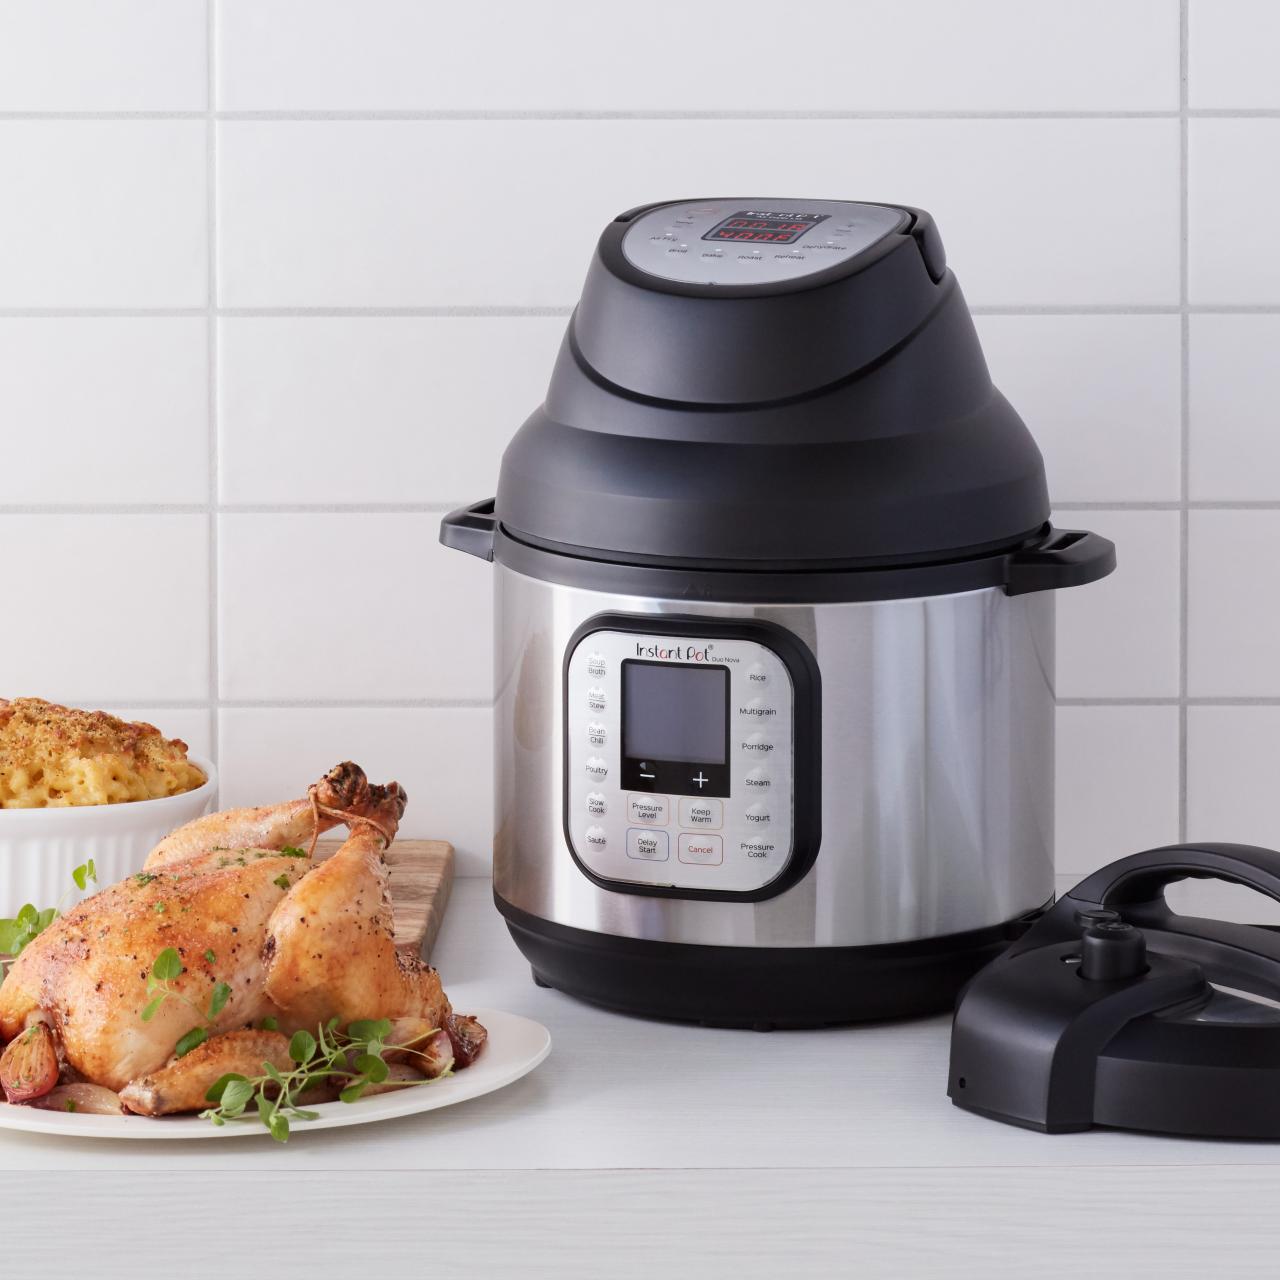 How to Use Instant Pot Air Fryer LidA Basics Tutorial For